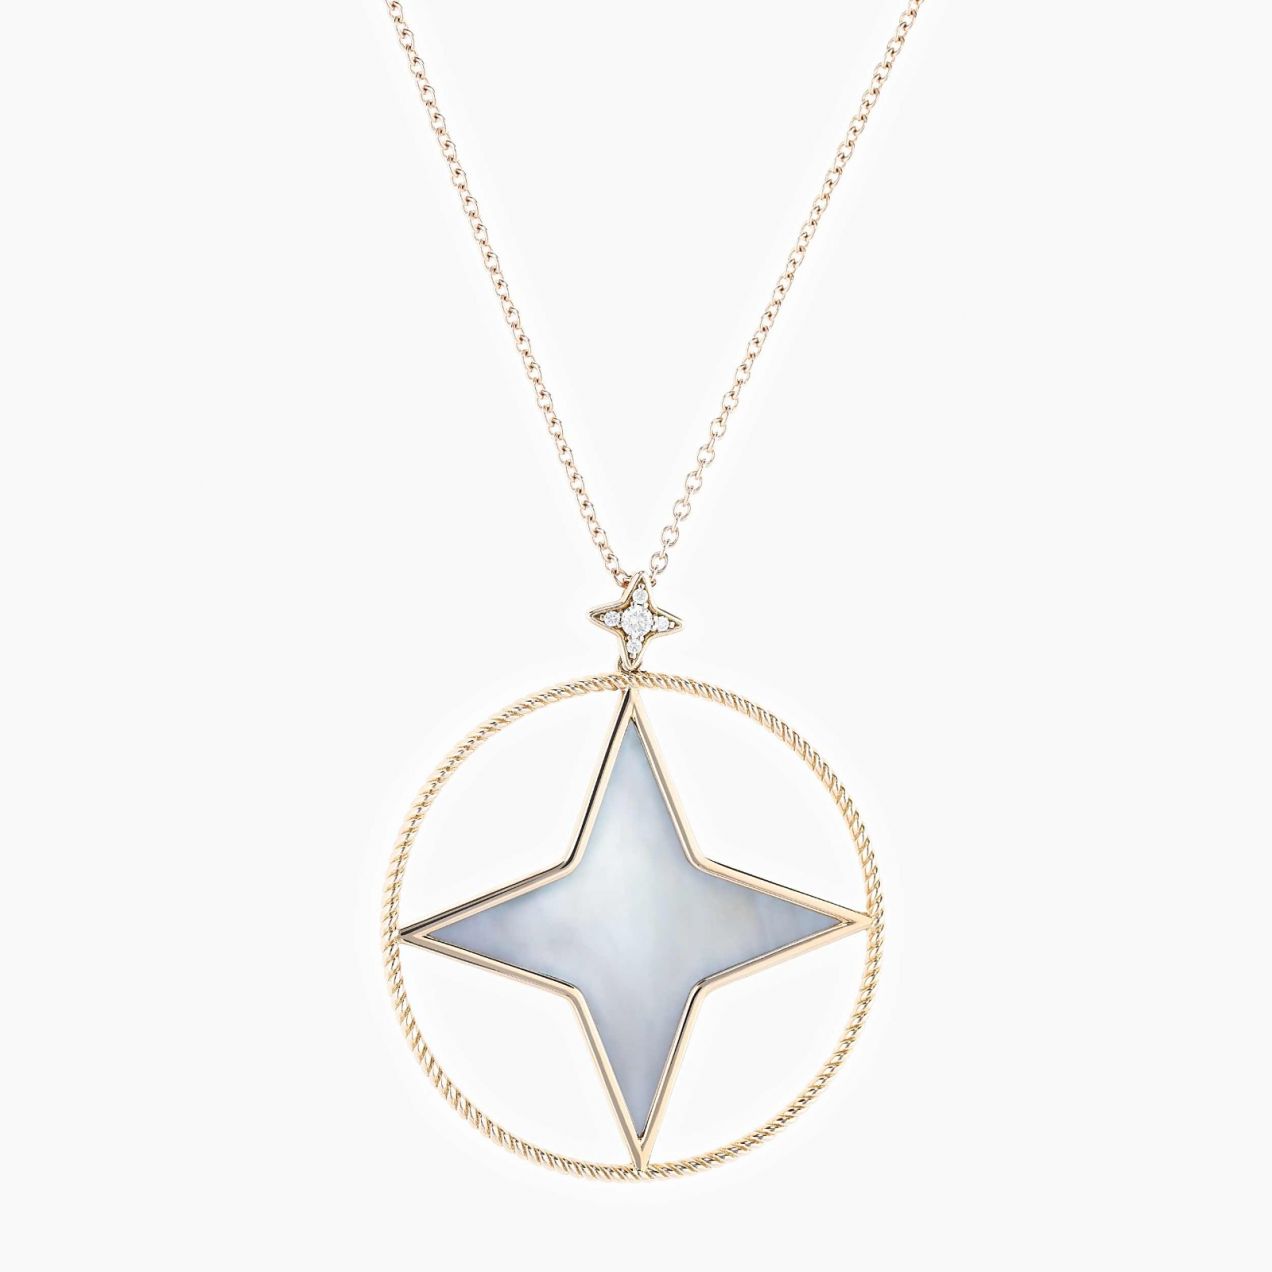 Circular star pendant in rose gold with central pearl and diamonds